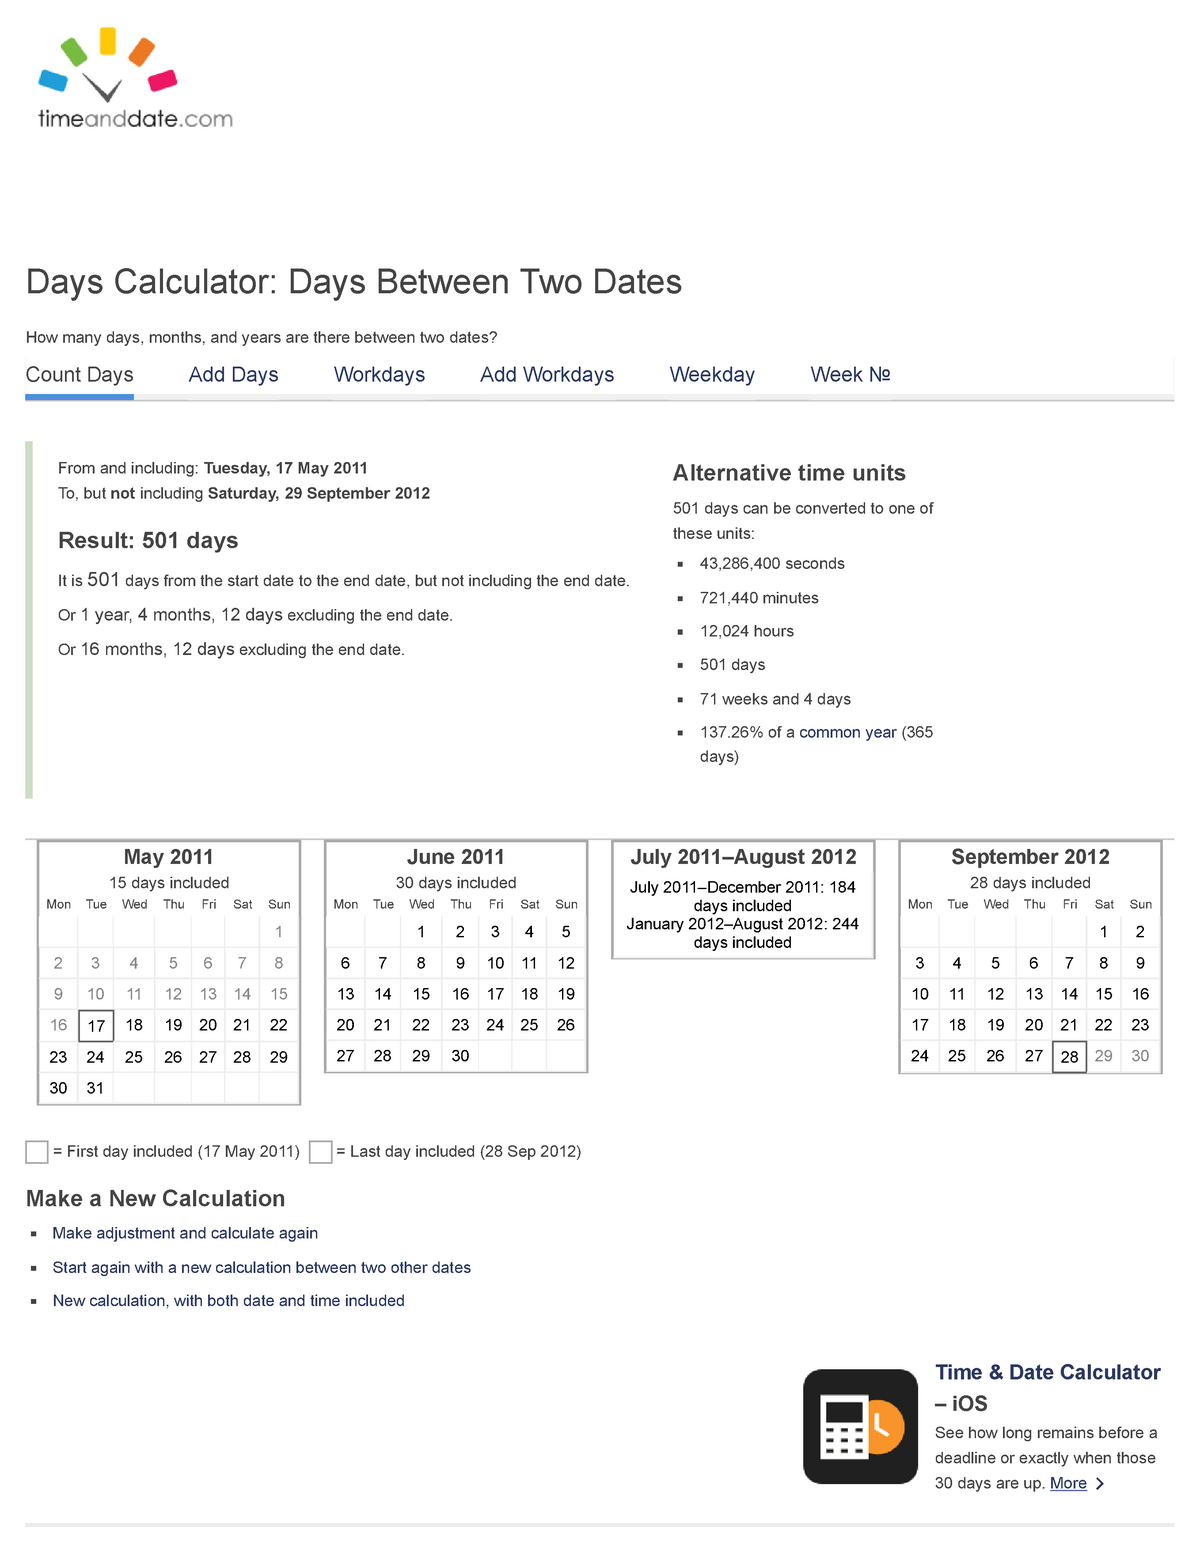 calculate-duration-between-two-dates-results-studocu